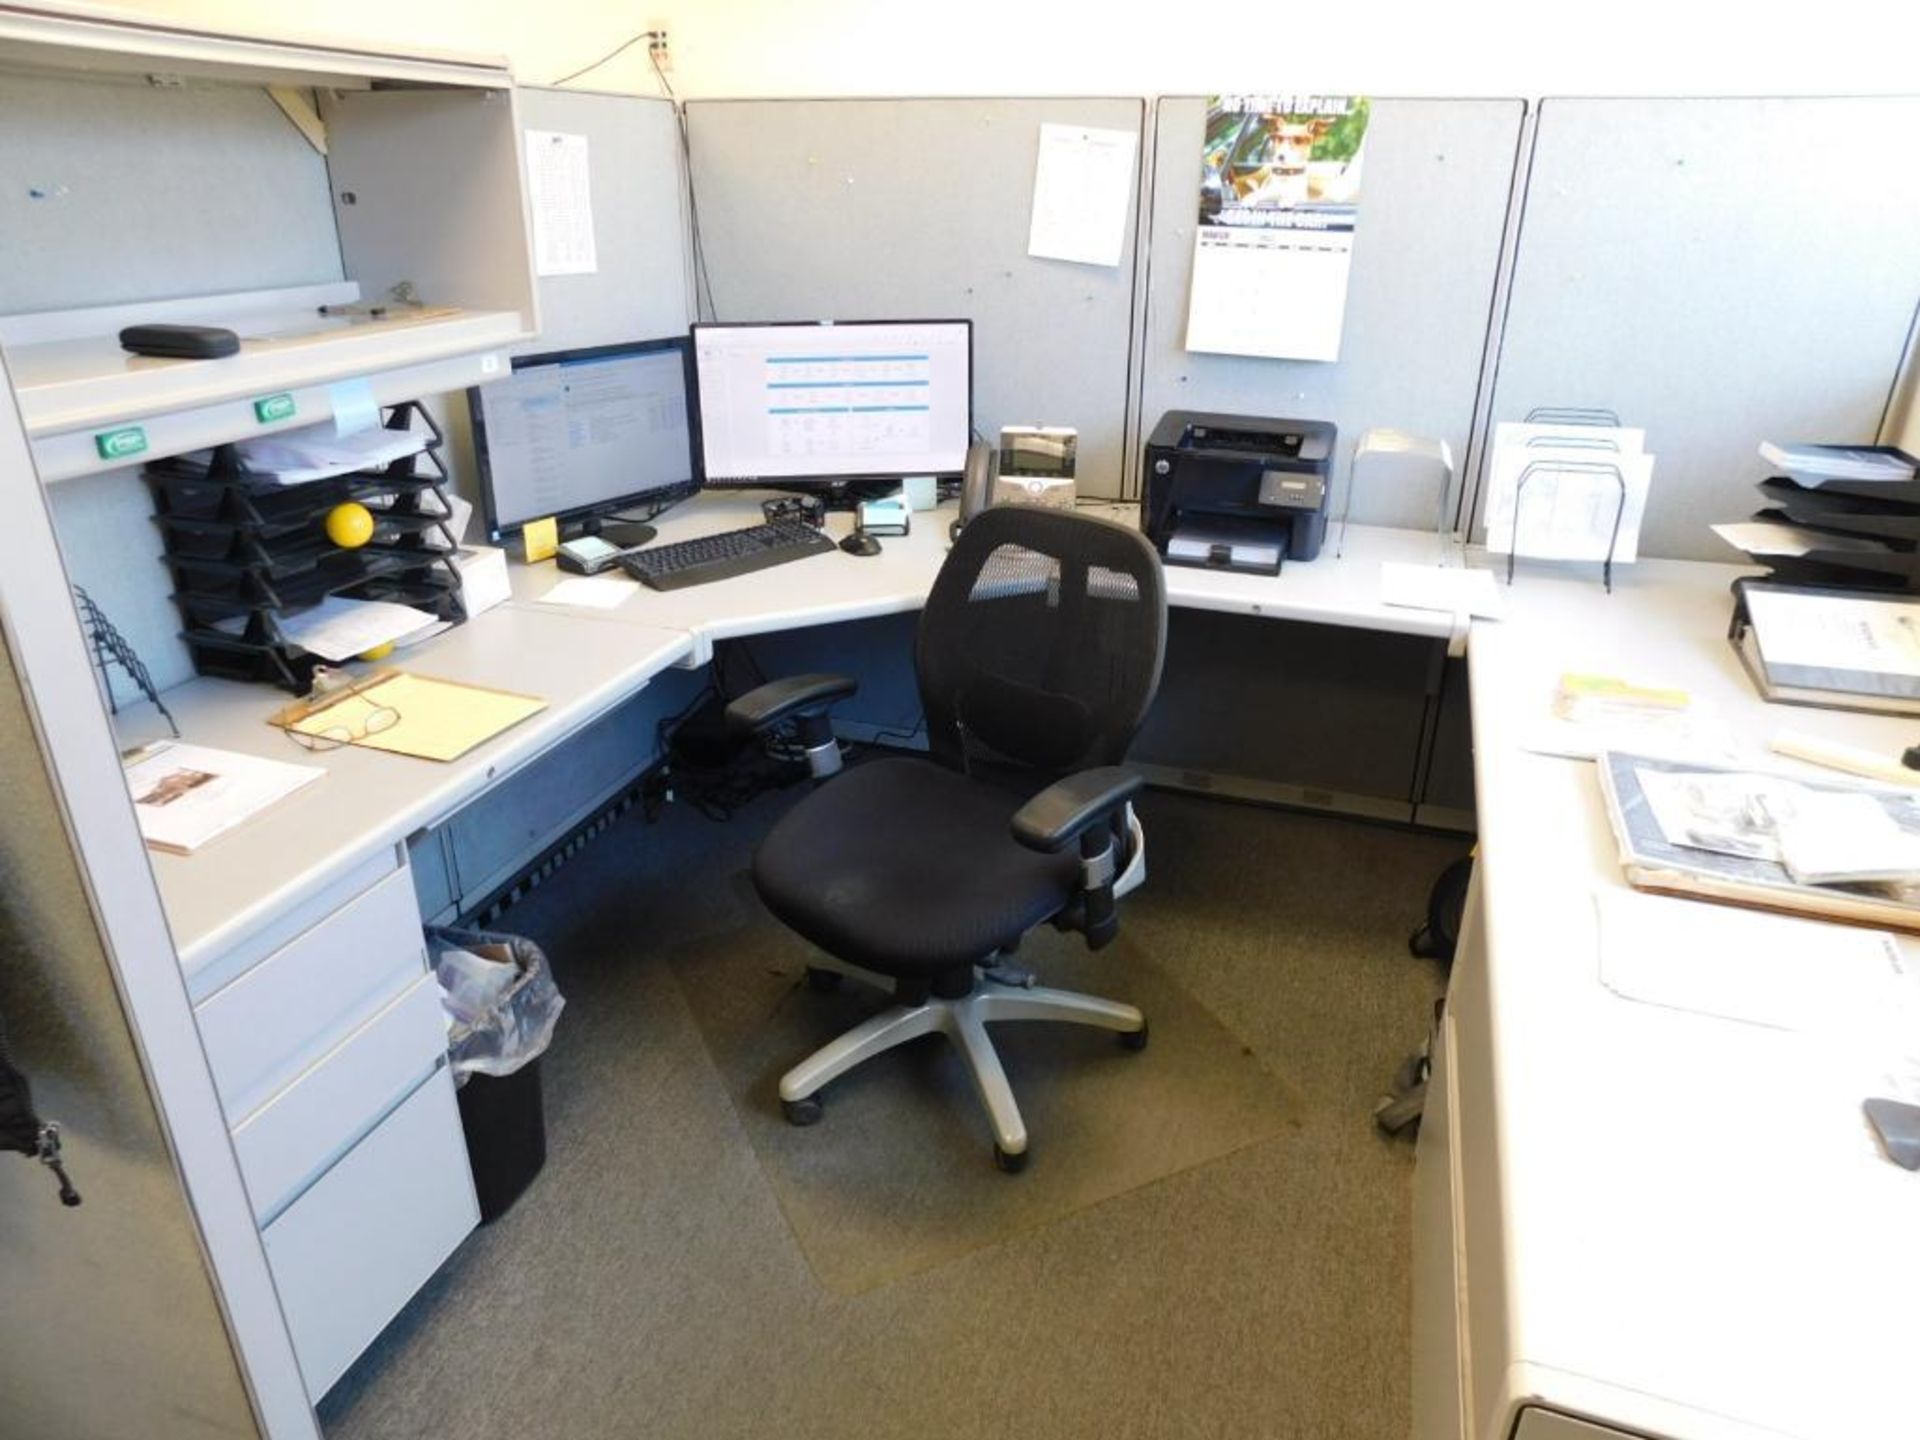 LOT: Contents of (4) Offices: (4) Cubicle Work Stations, (5) Desks, (7) Tables, (16) Chairs, Visio B - Image 6 of 15